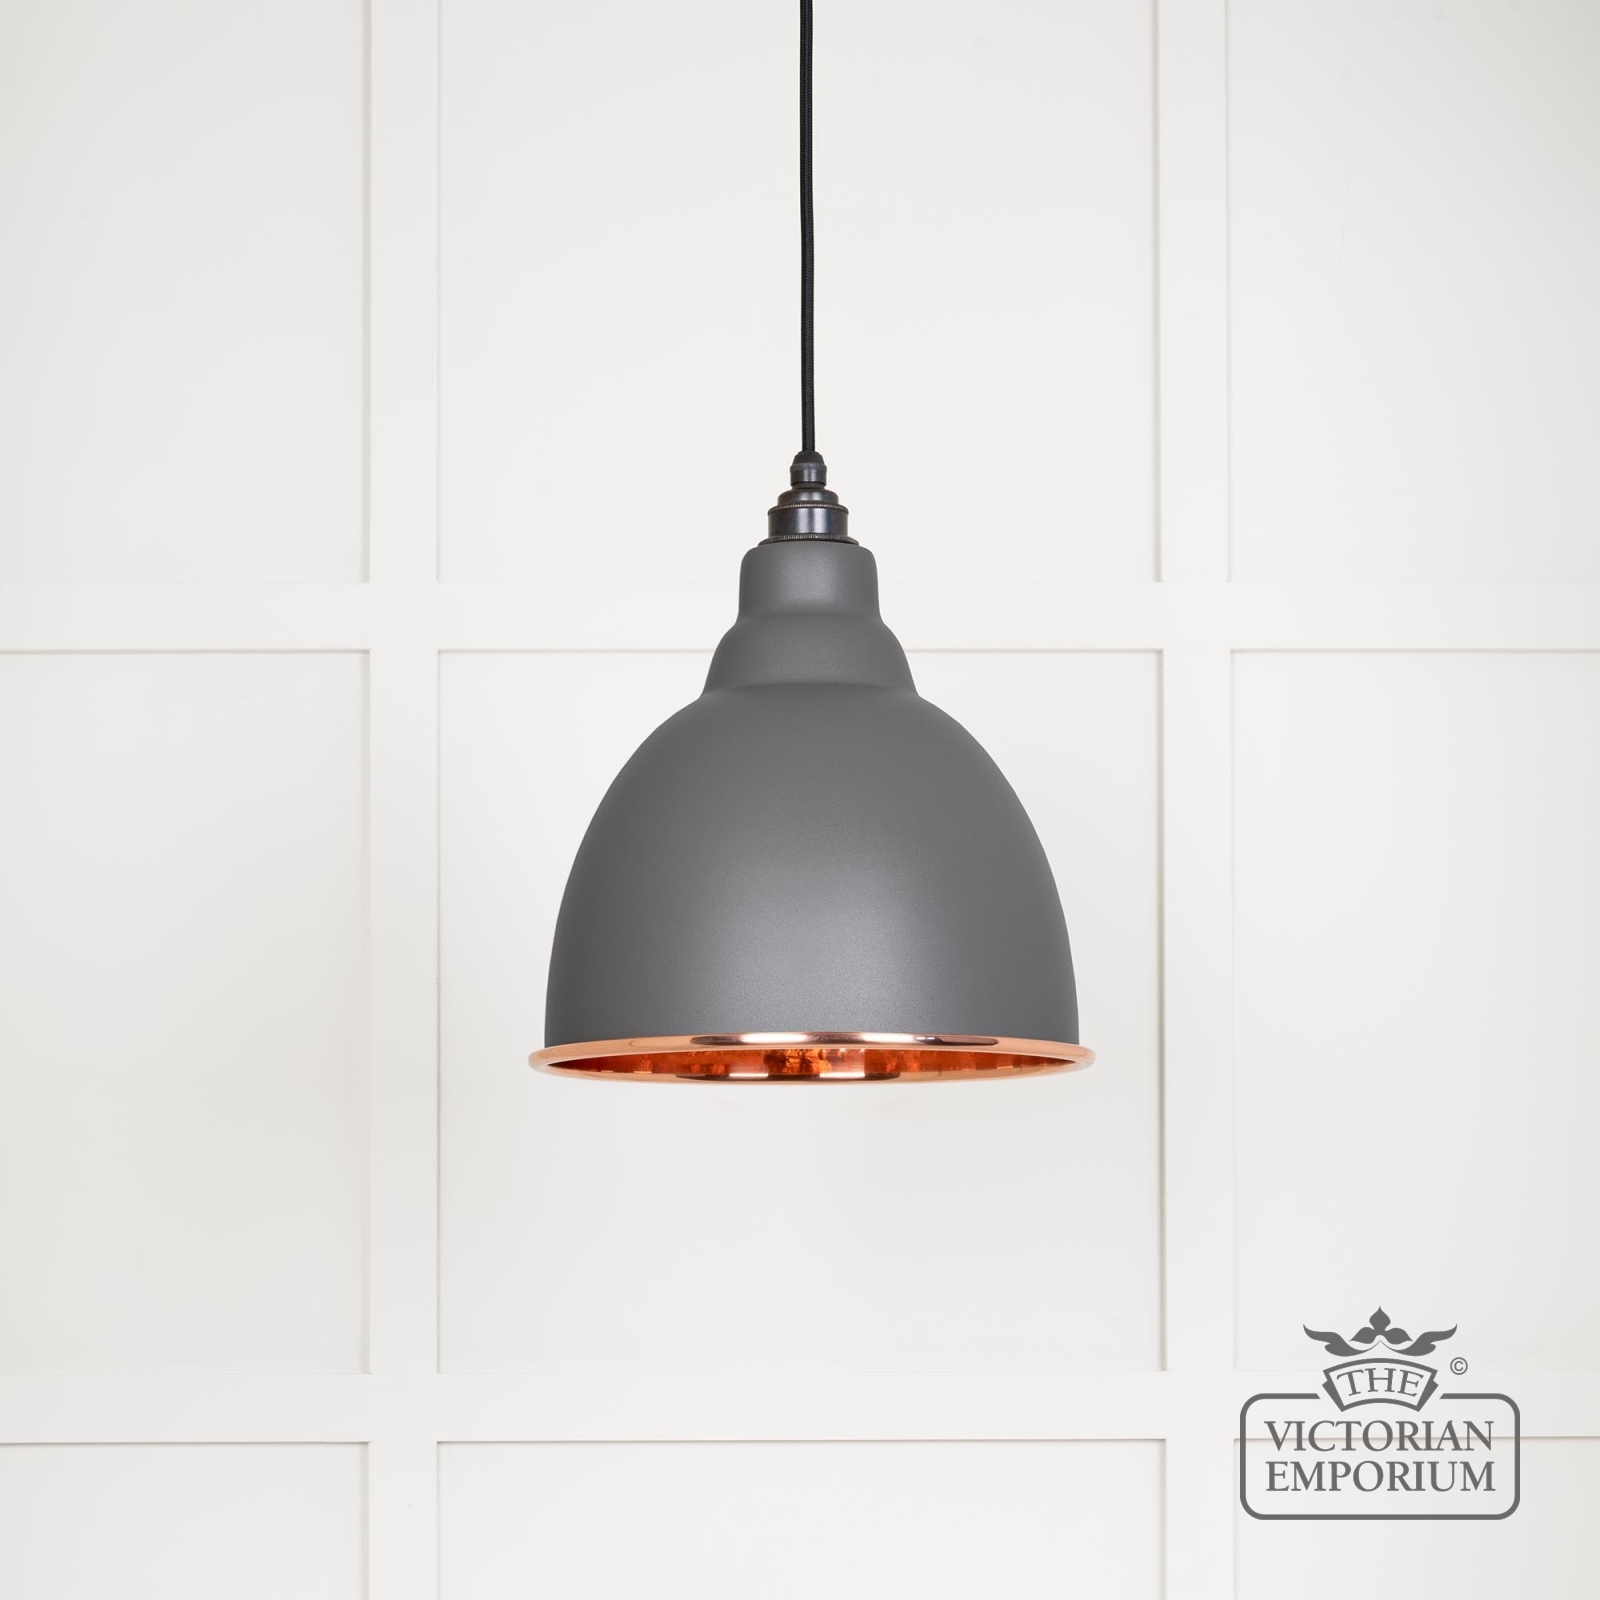 Brindle Pendant Light in Bluff with Hammered Copper Interior